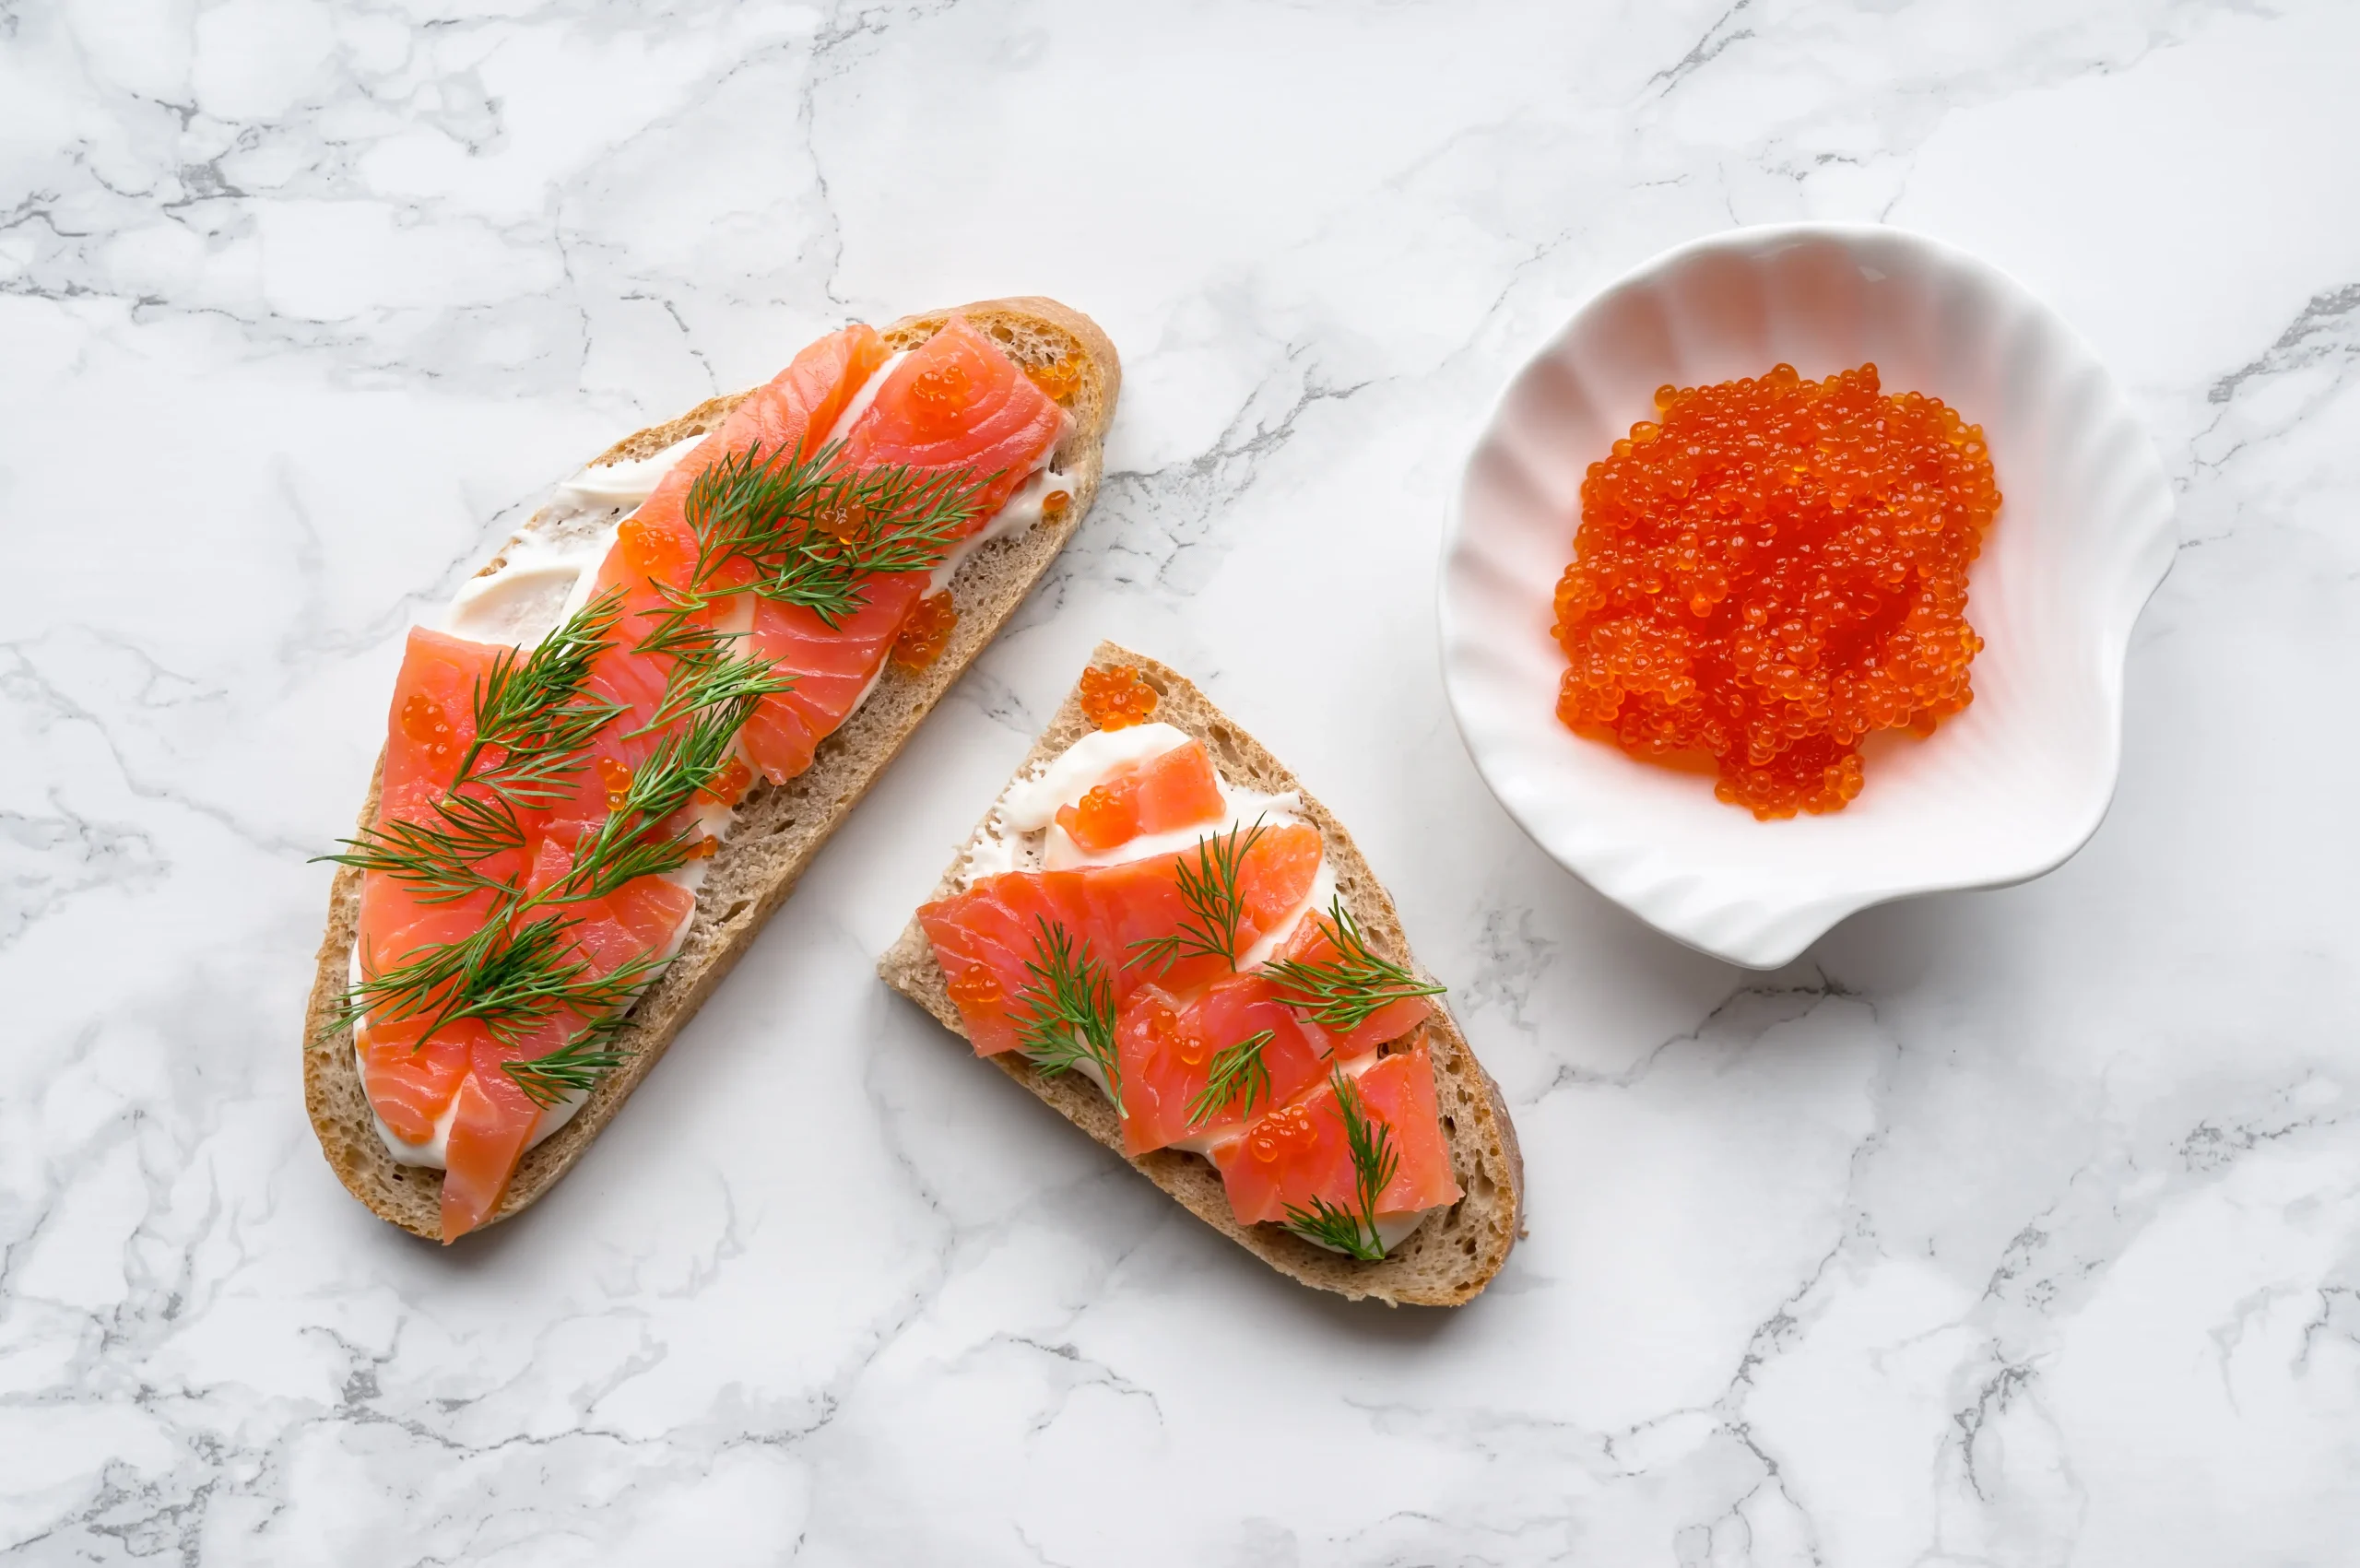 is smoked salmon good for weight loss - Does smoked salmon burn belly fat